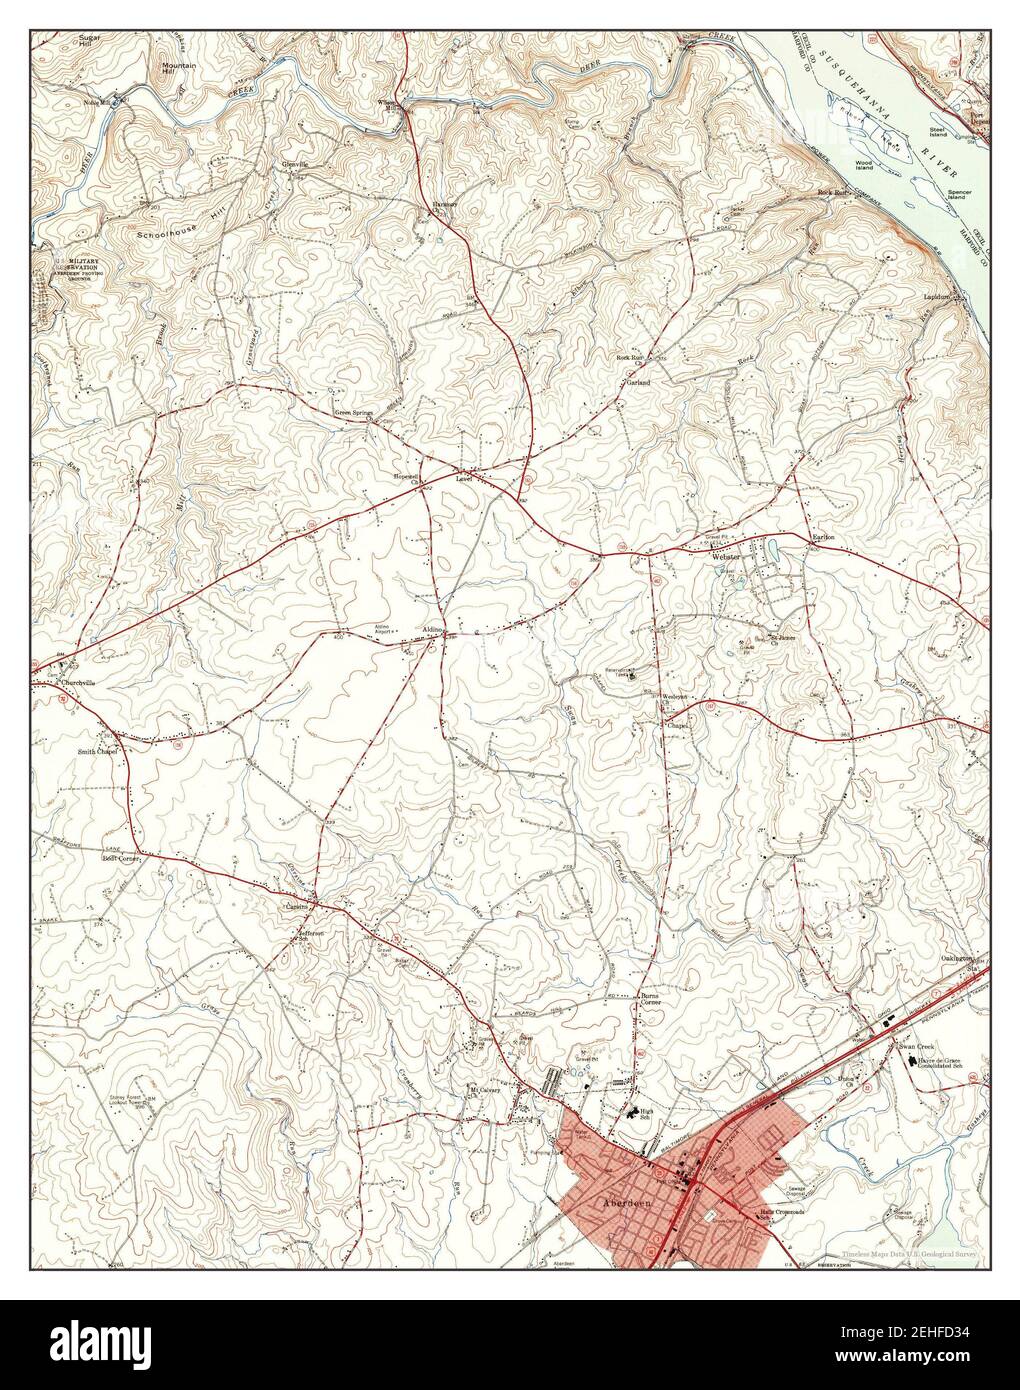 Aberdeen Maryland Map 1953 124000 United States Of America By Timeless Maps Data Us Geological Survey 2EHFD34 